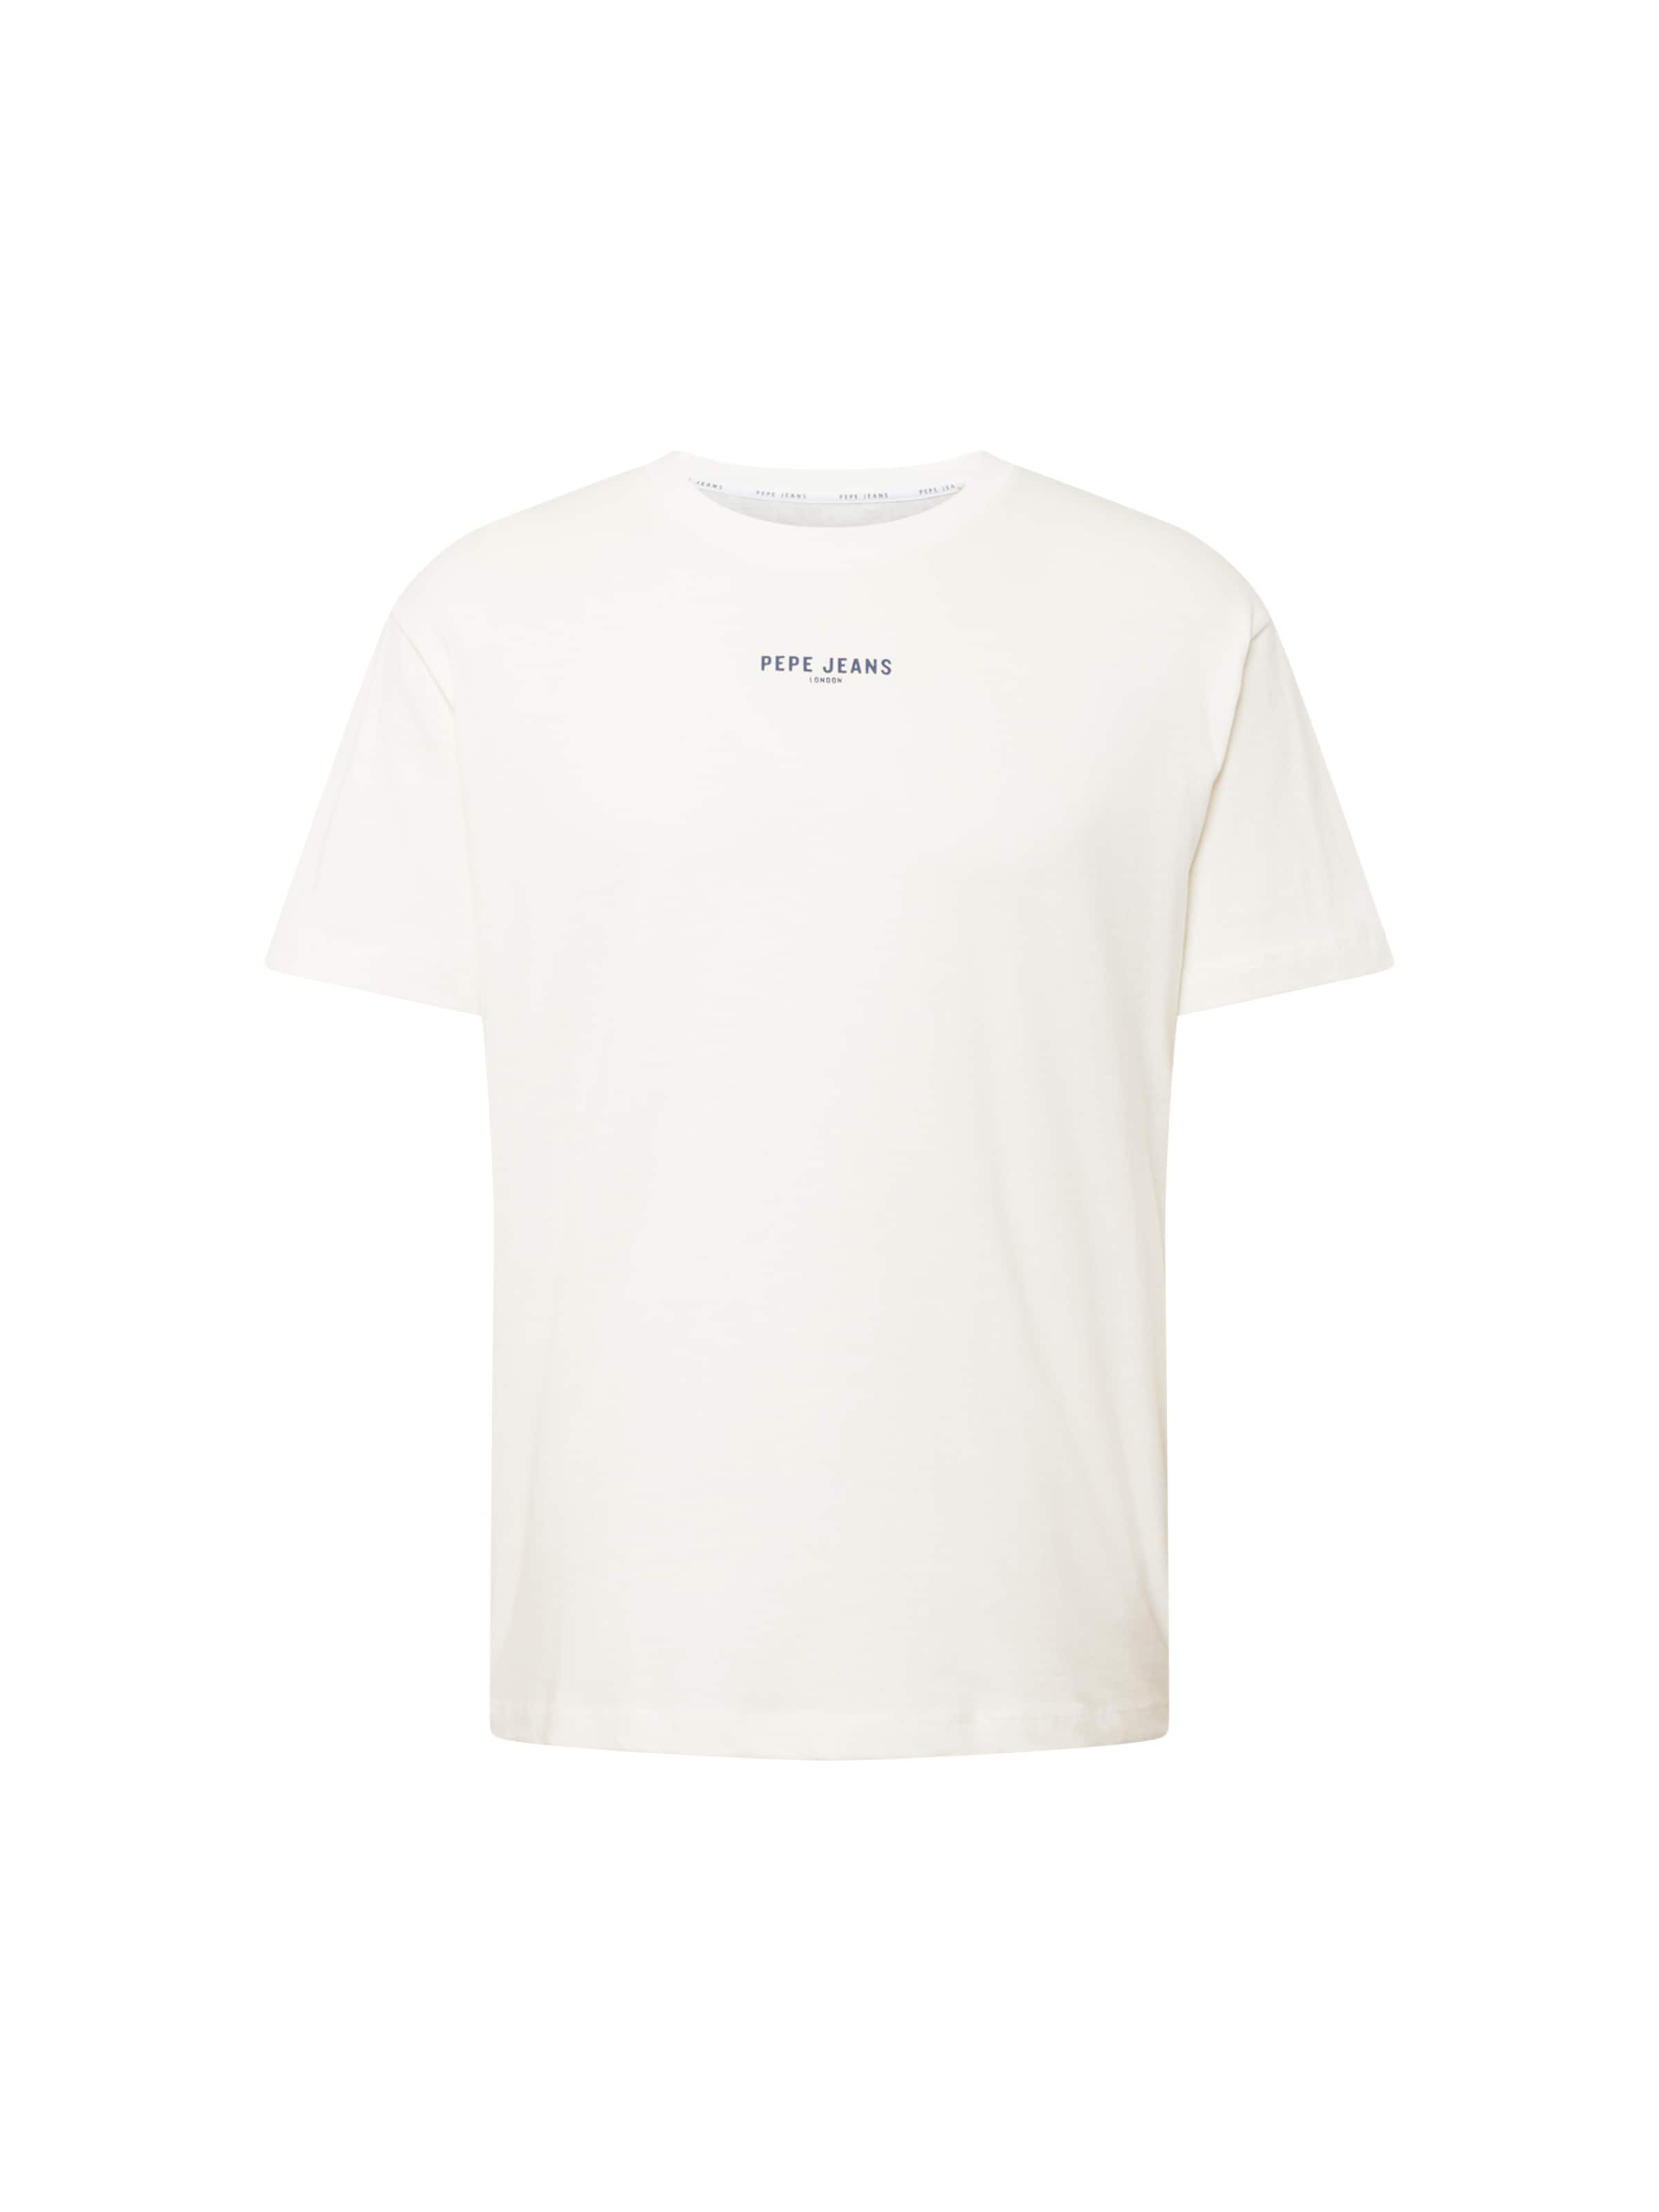 Details 123+ pepe jeans t shirt white best